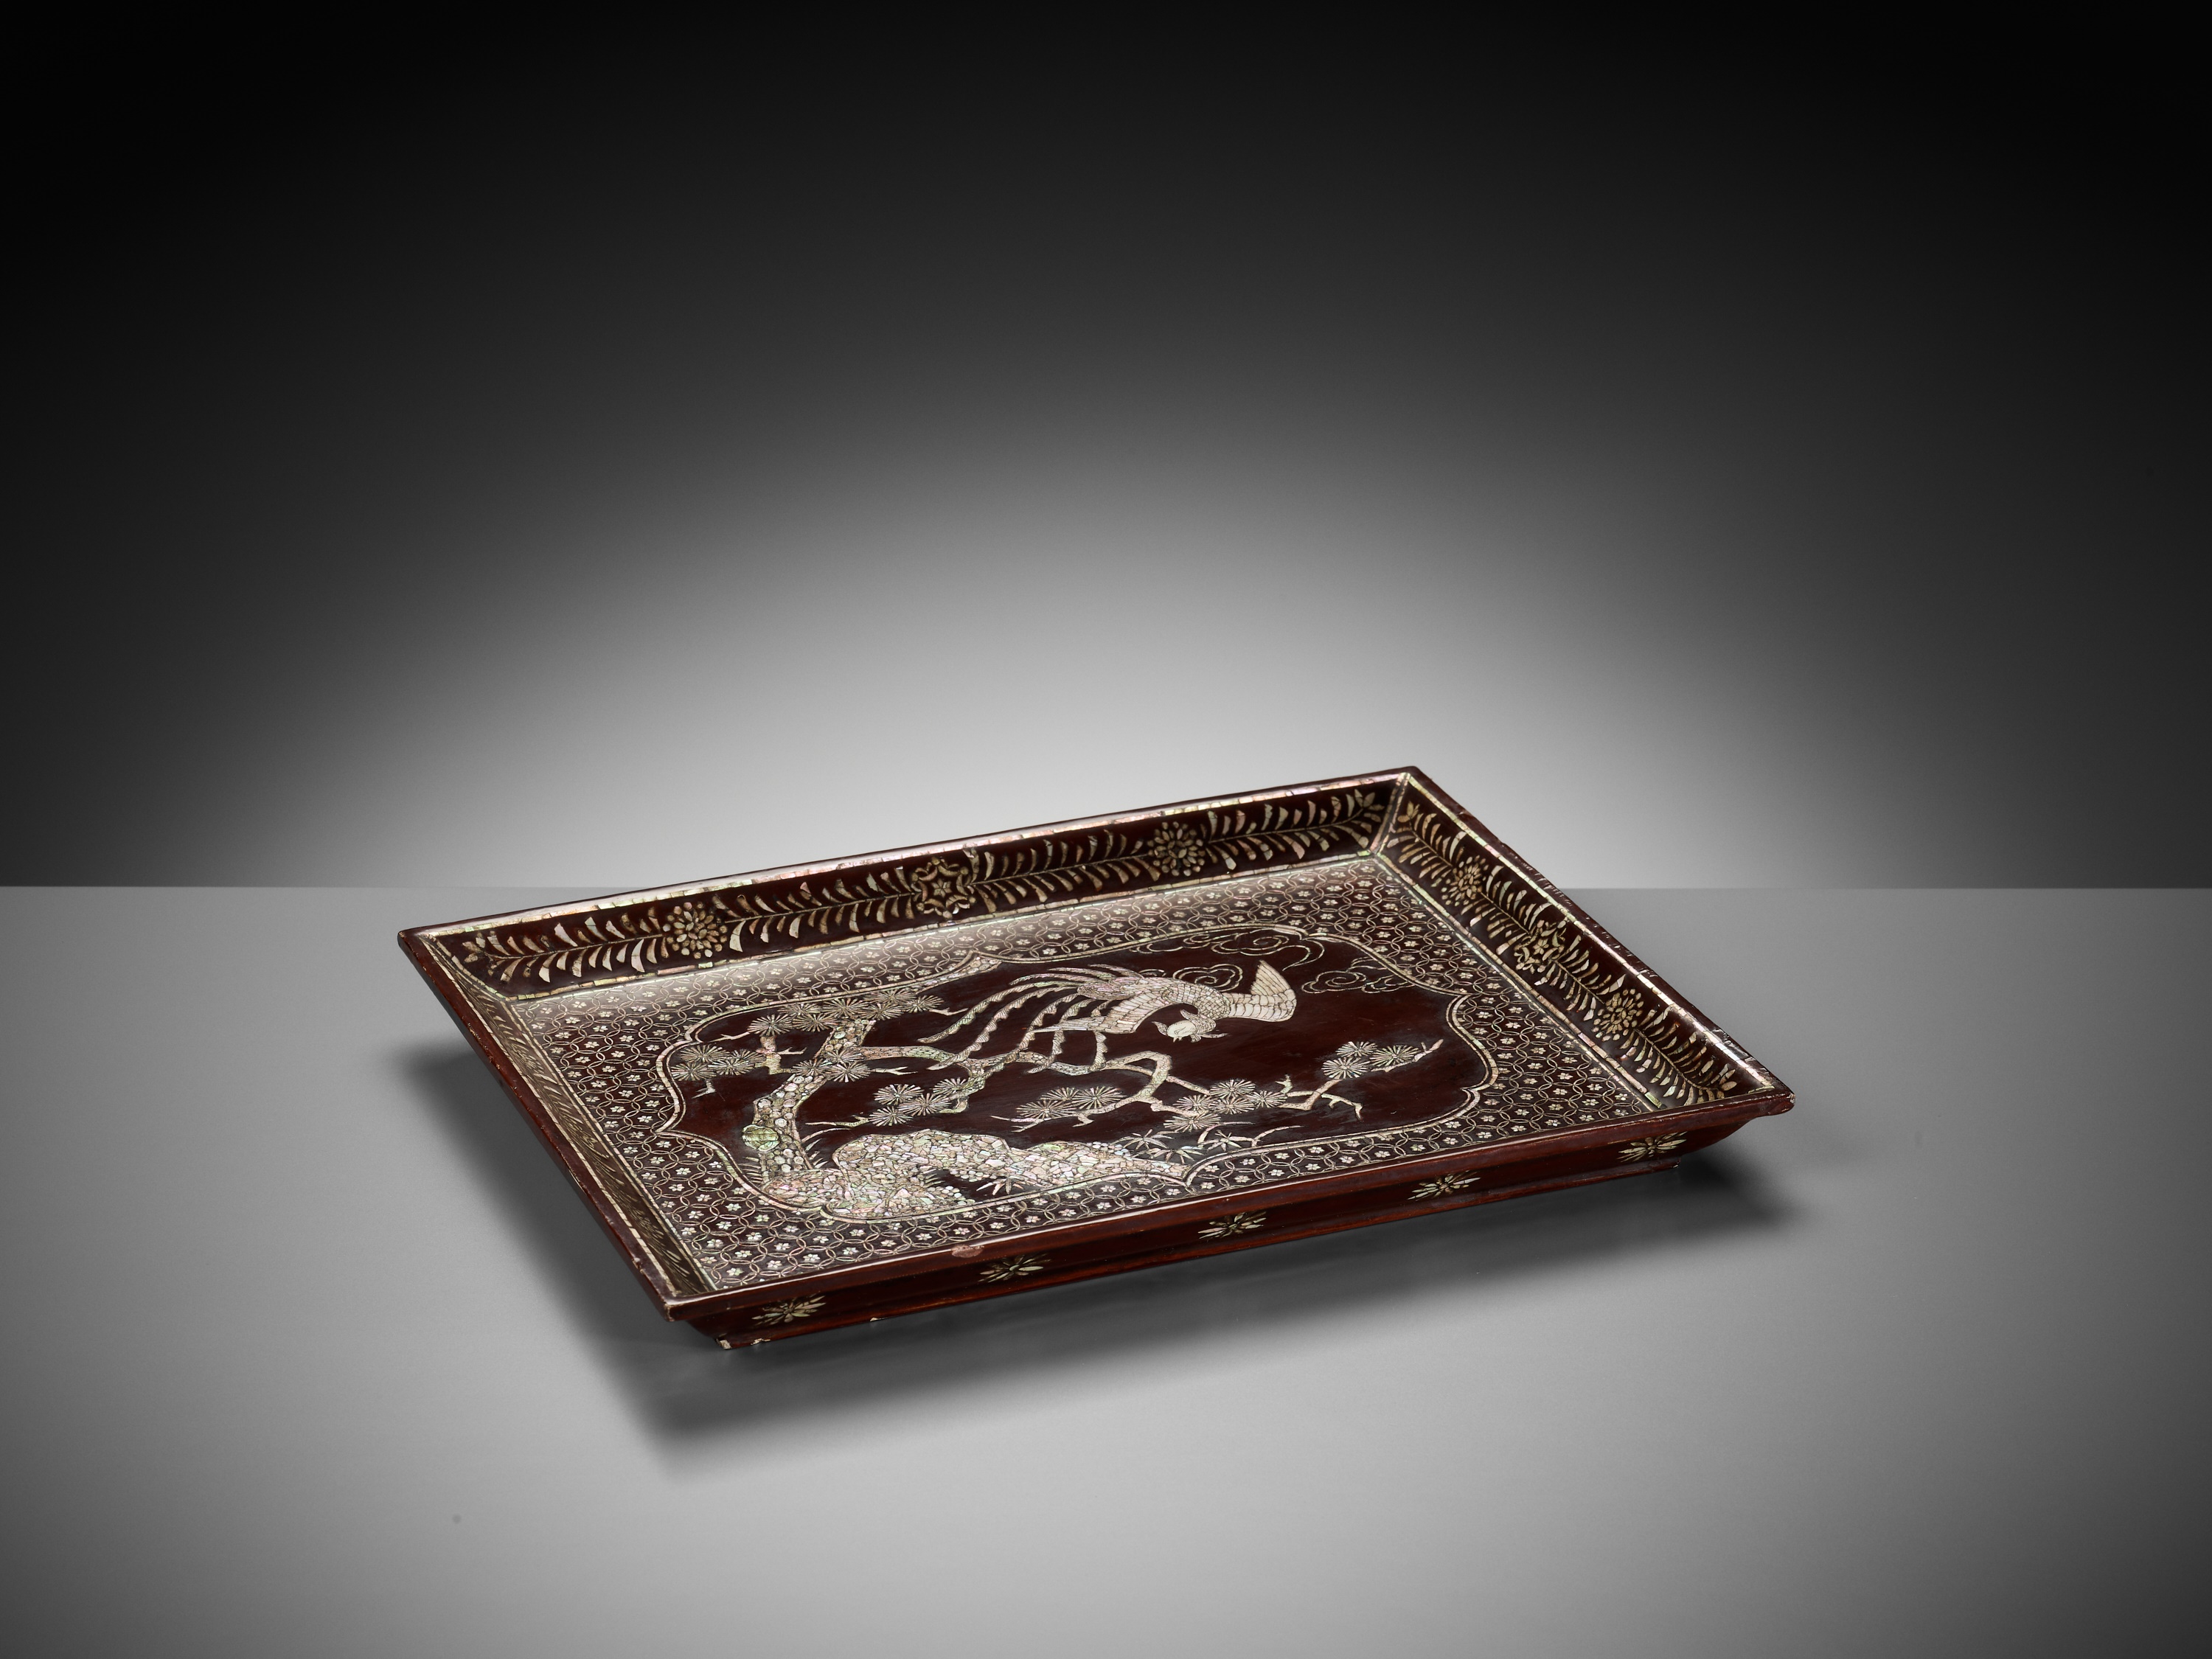 A RARE INLAID LACQUER 'PHOENIX' TRAY, MING DYNASTY - Image 2 of 8